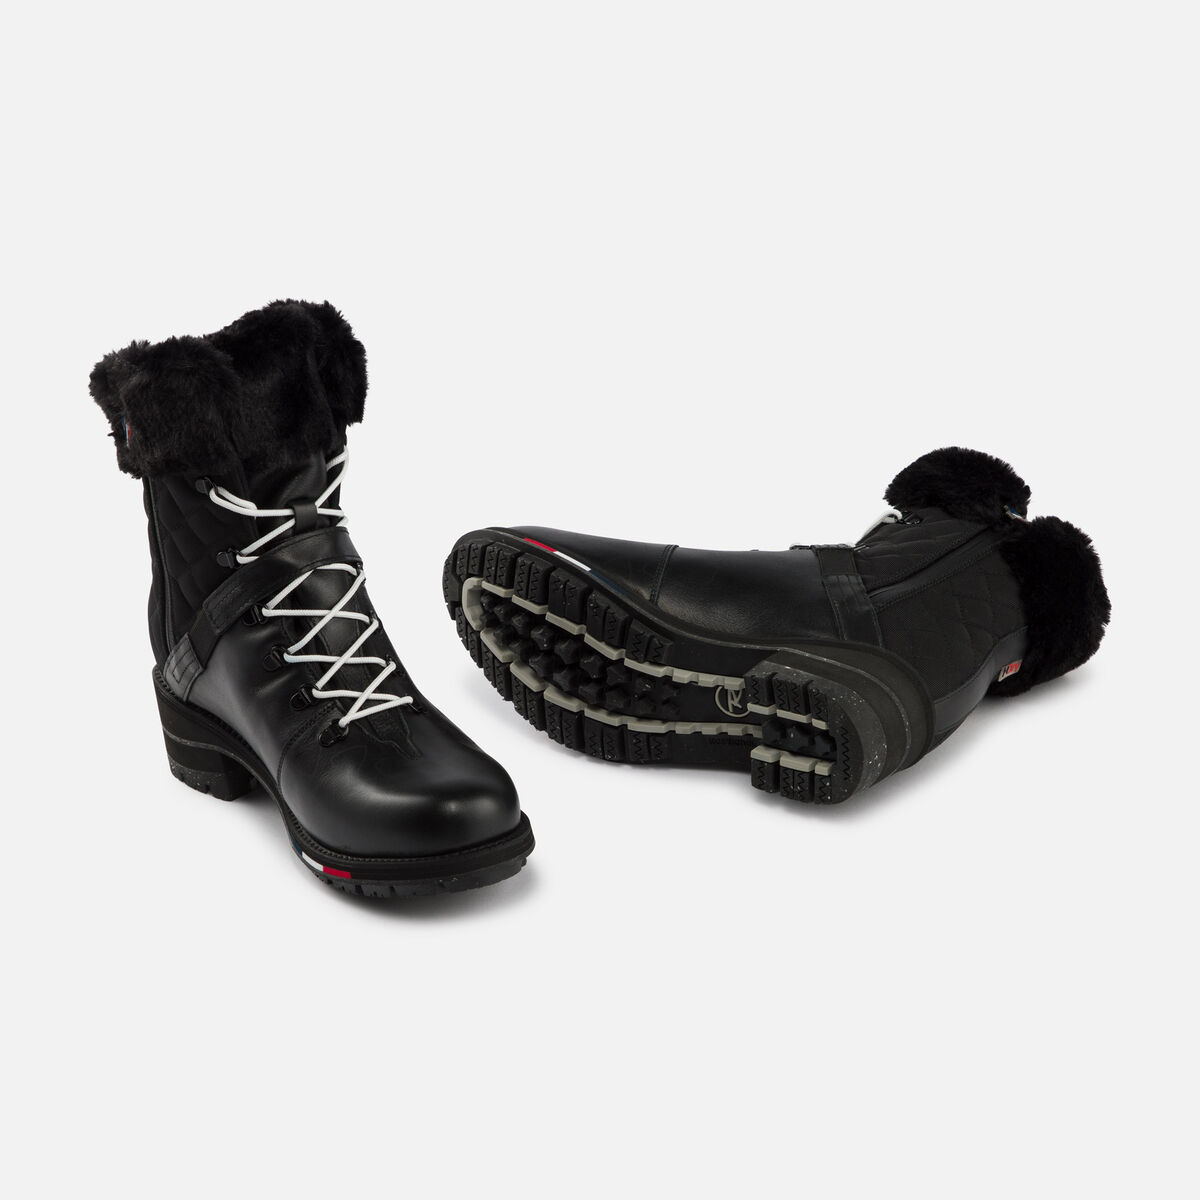 Women's 1907 Megeve Limited Editions Boots